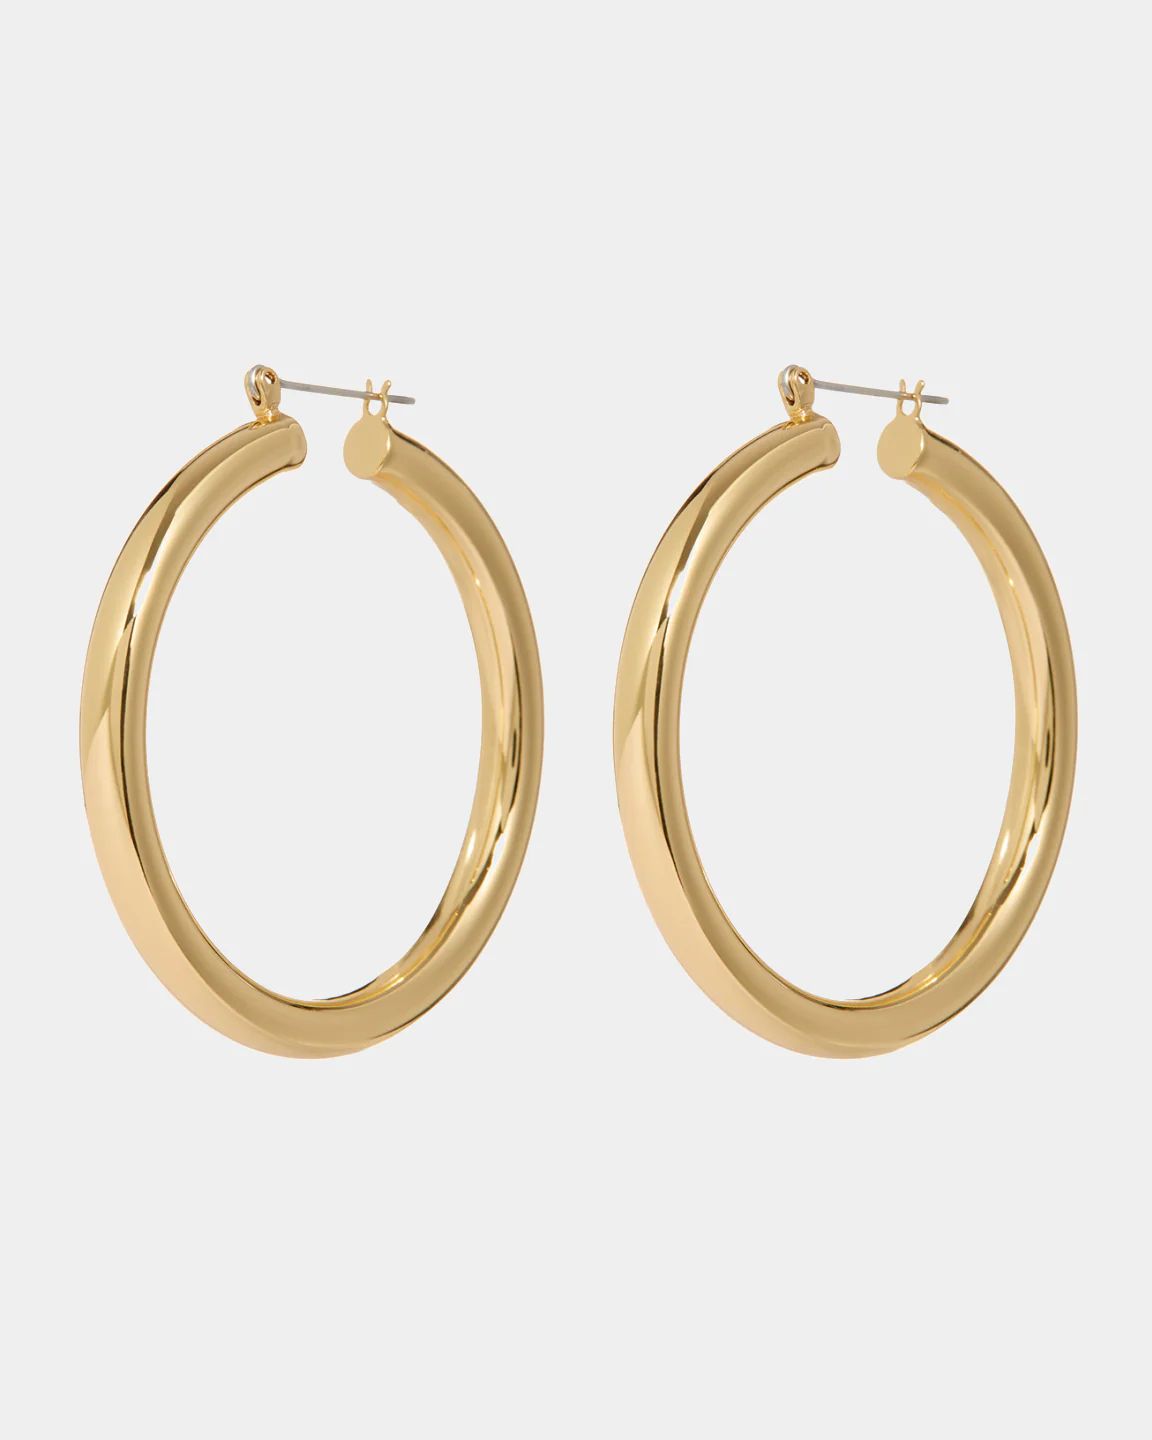 Luv AJ Amalfi Tube Hoops Earring in Gold Lord & Taylor | Lord & Taylor